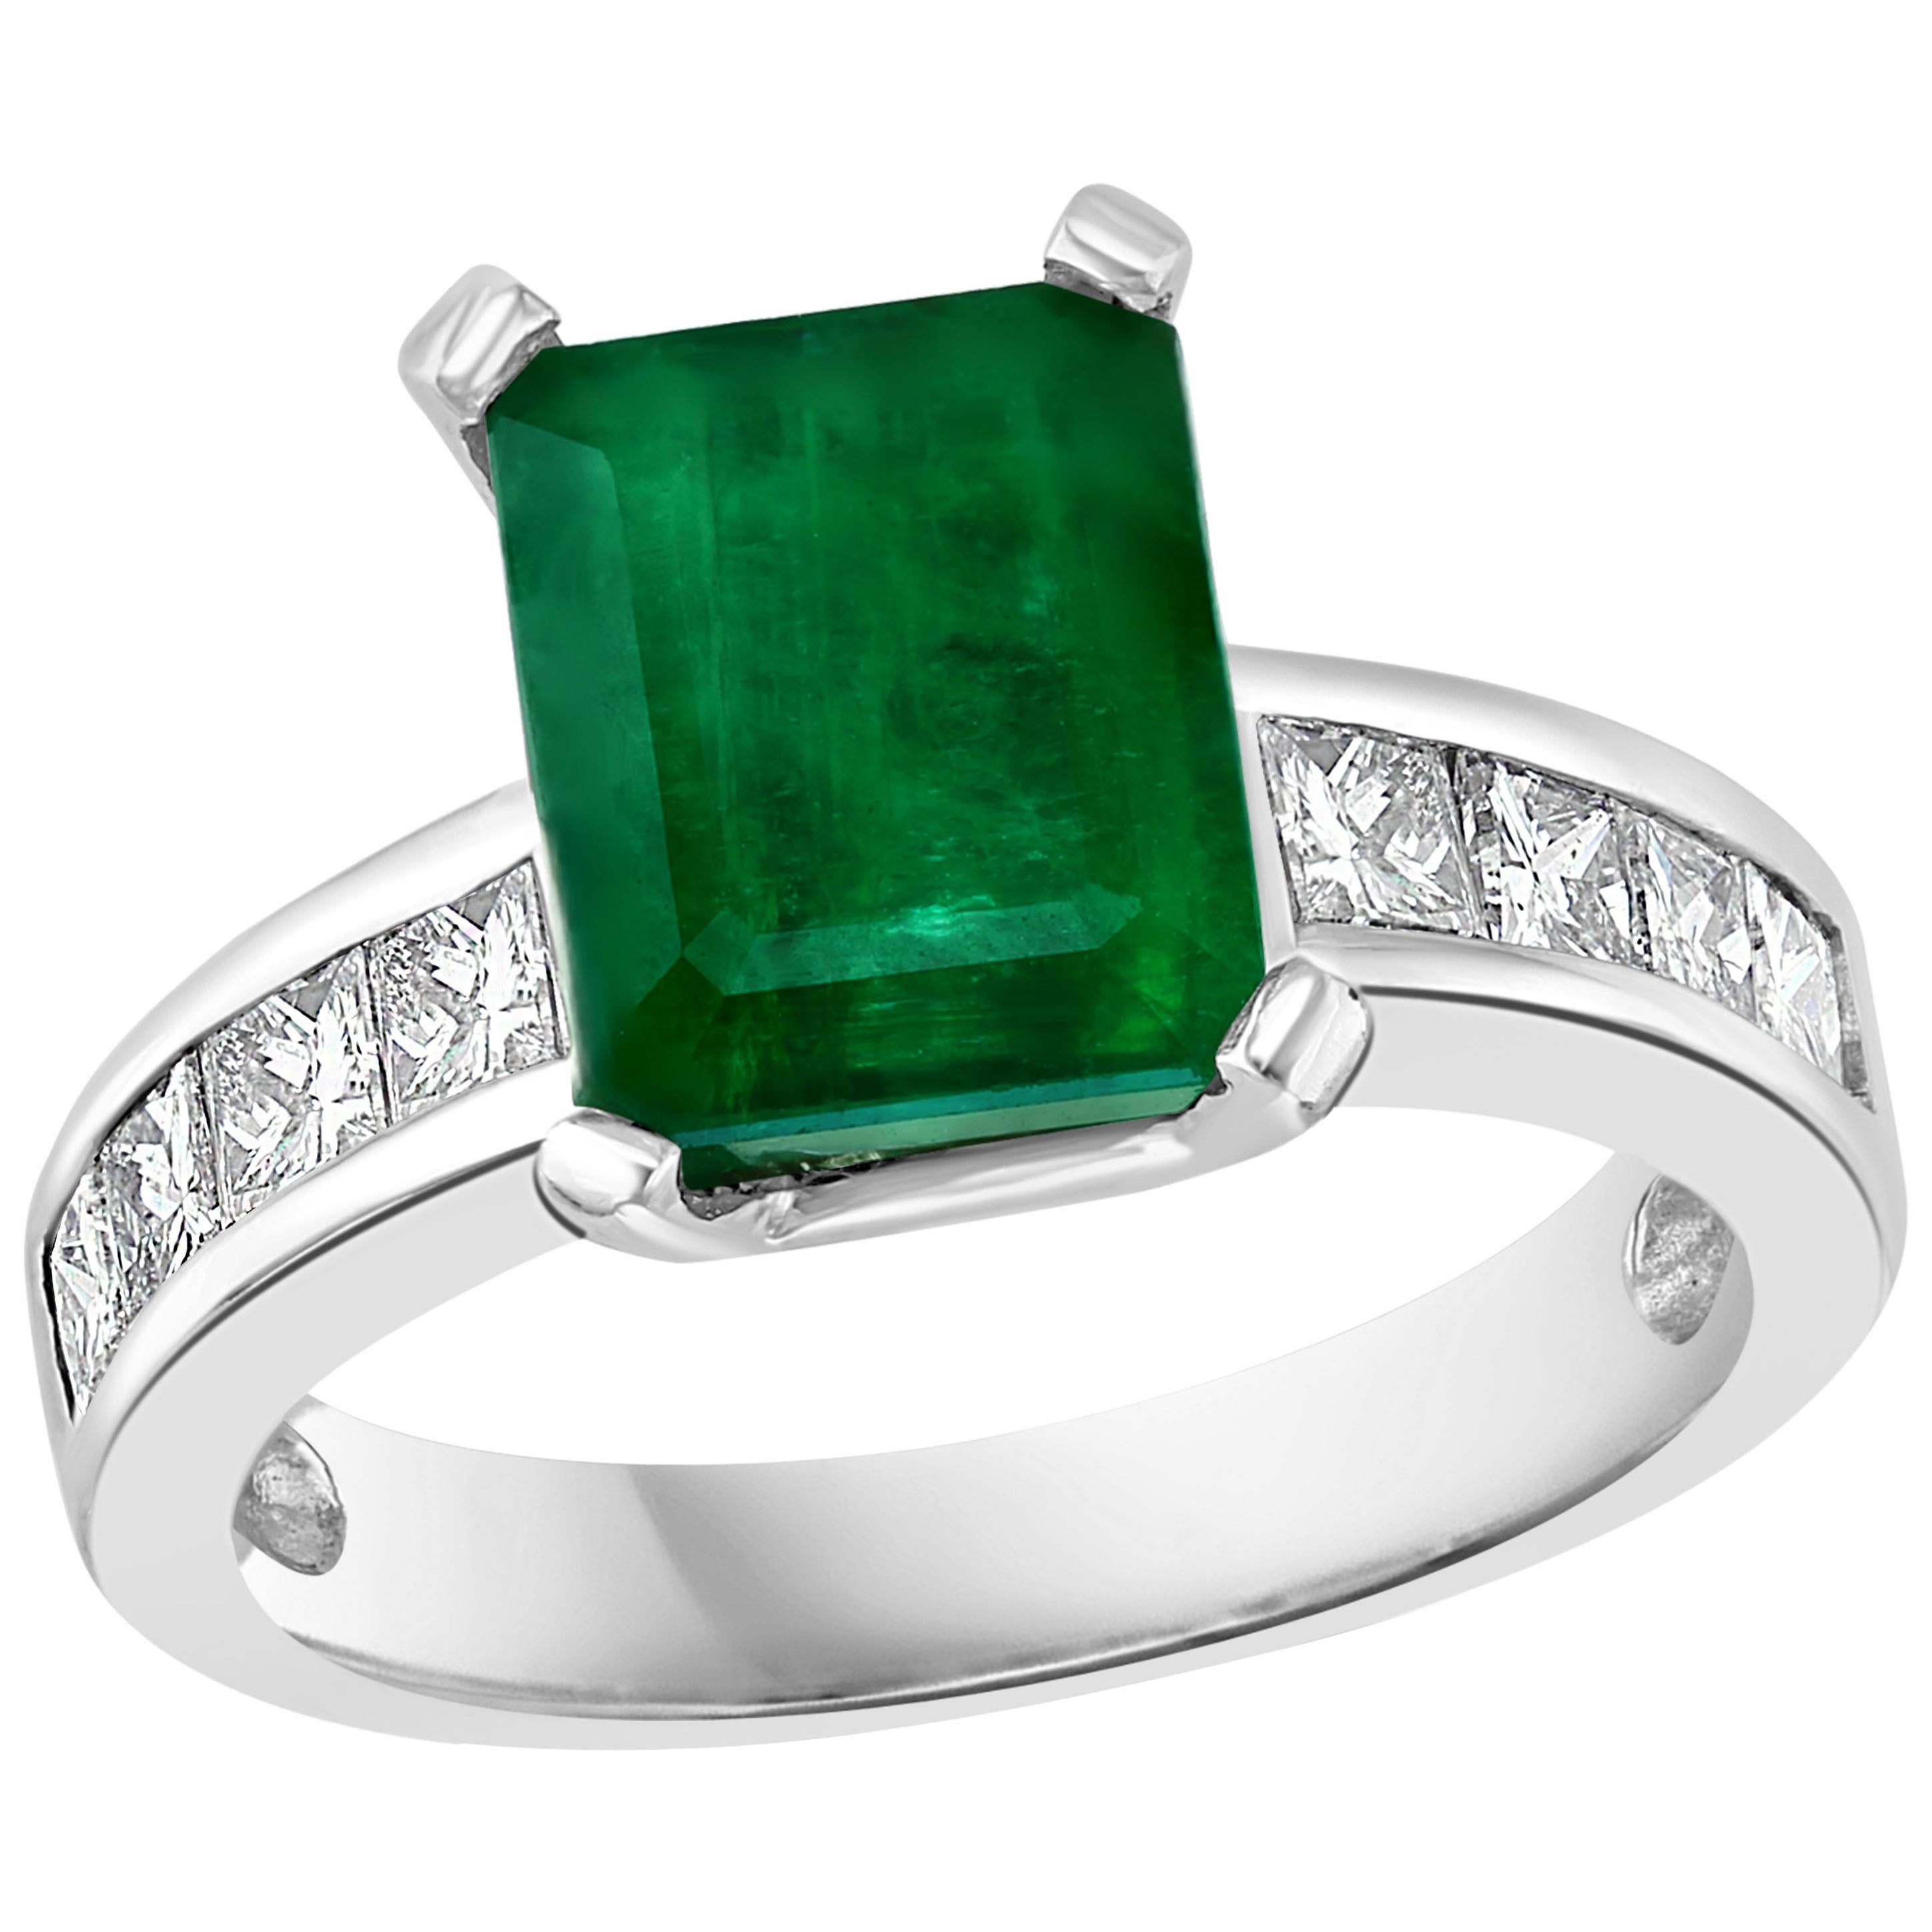 3.5 Carat Pear Cut Emerald and Diamond Ring 14 Karat White Gold For ...